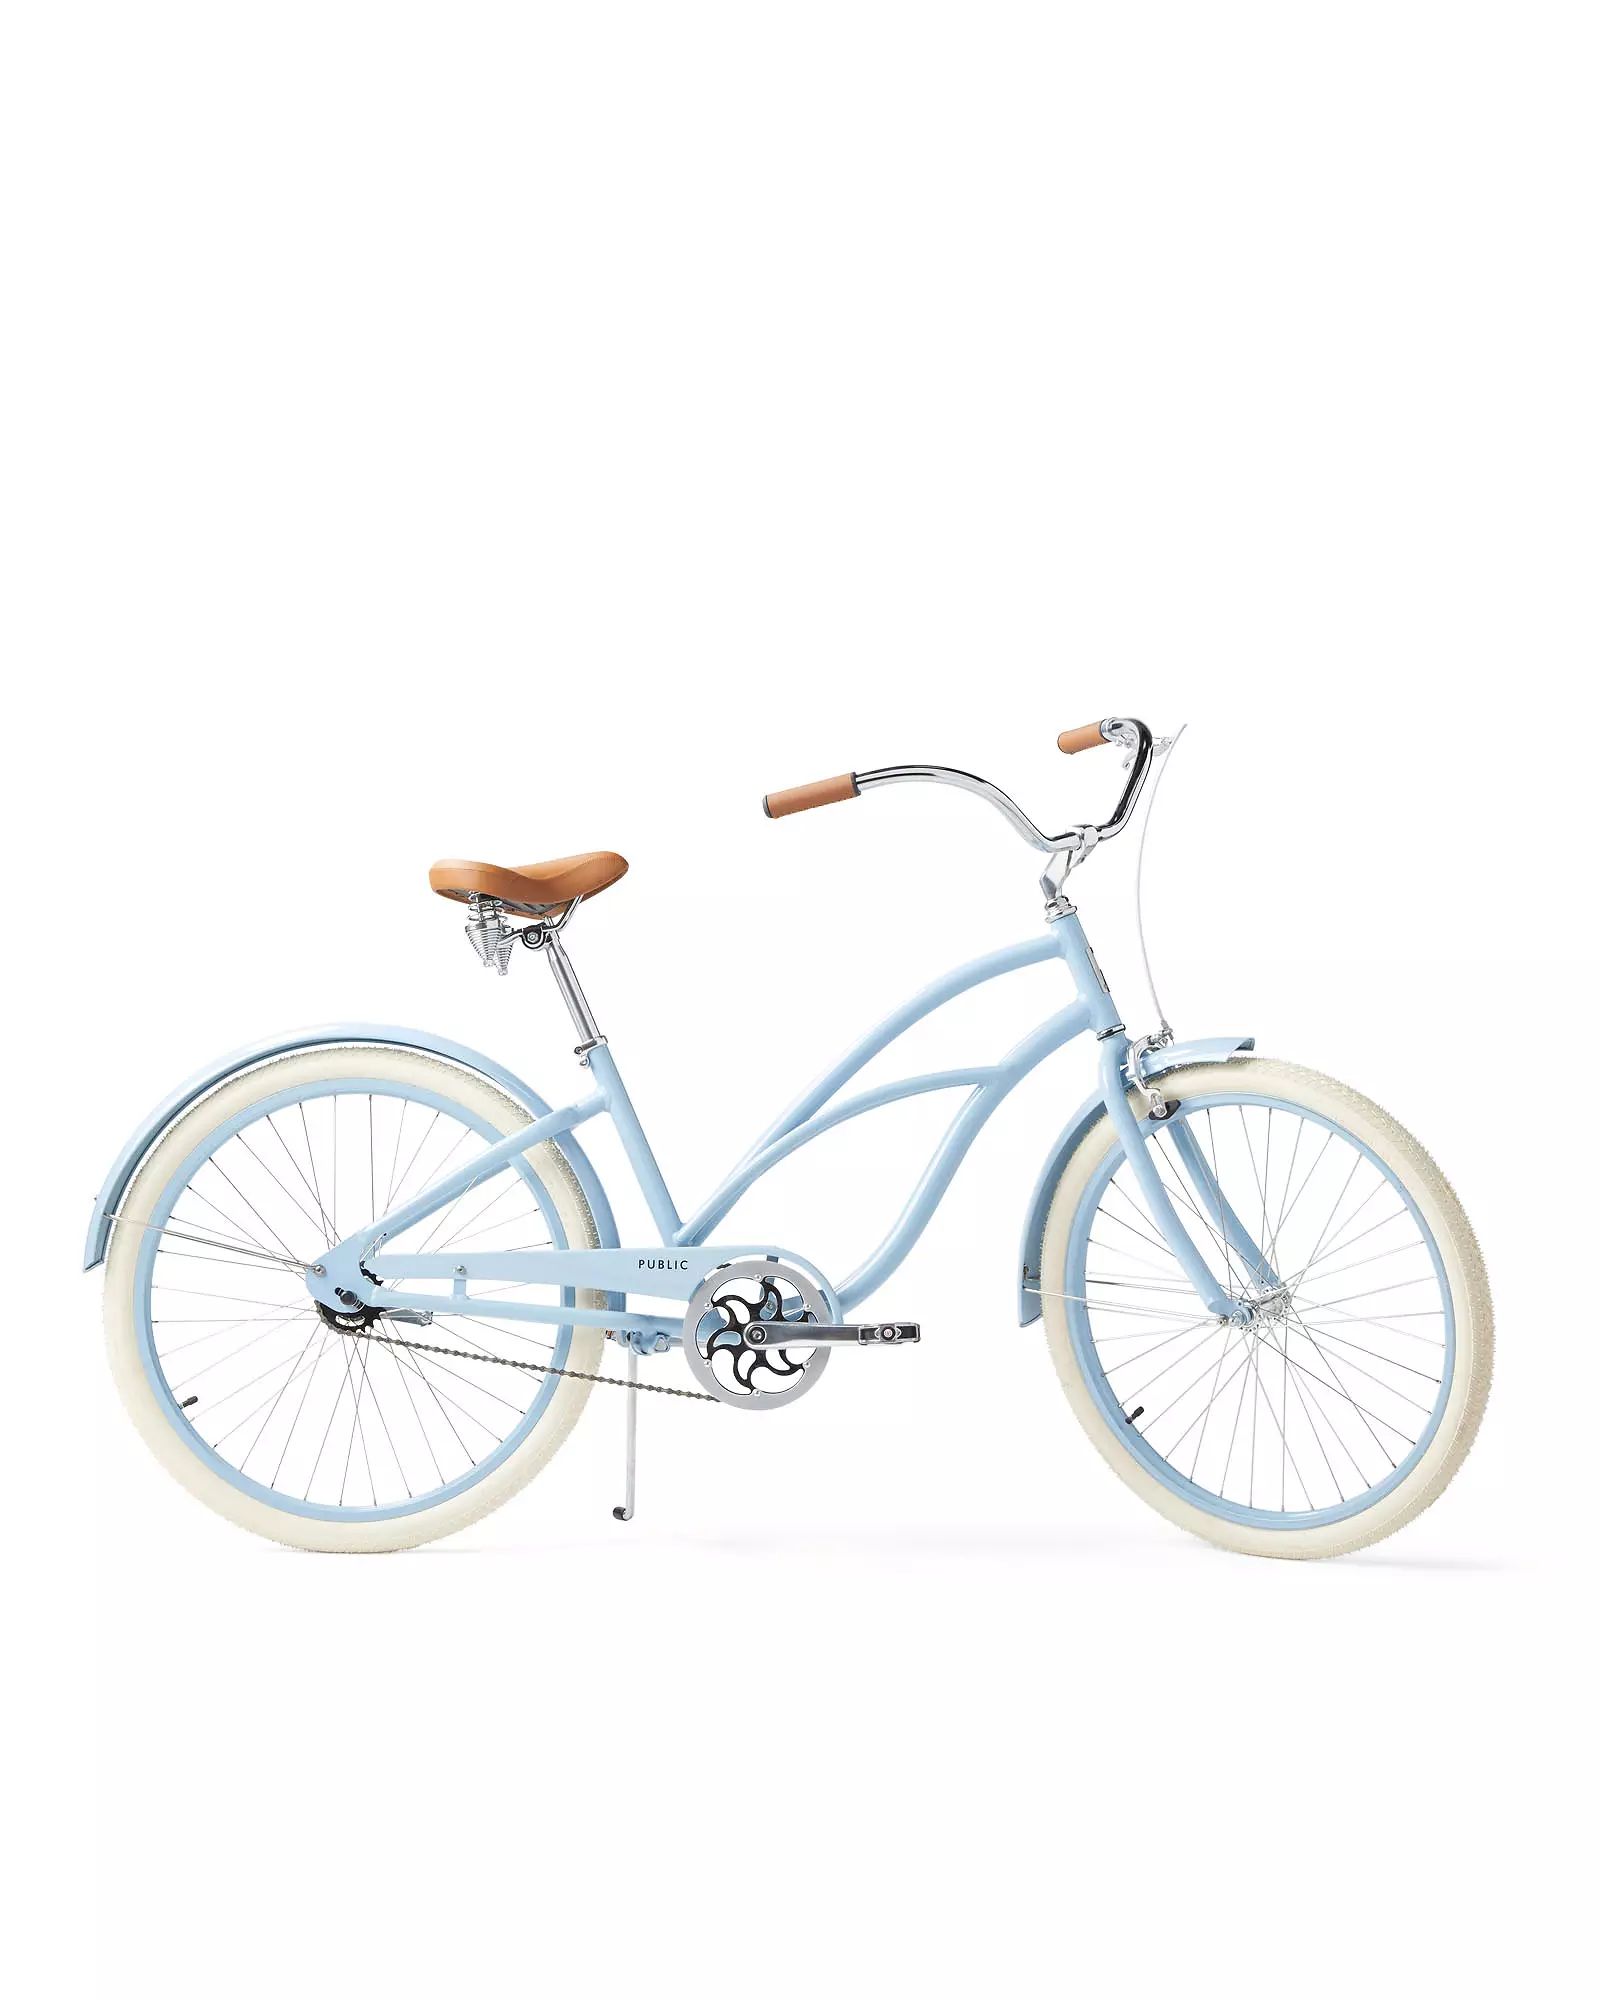 Limited Edition PUBLIC® Beach Cruiser Bike | Serena and Lily